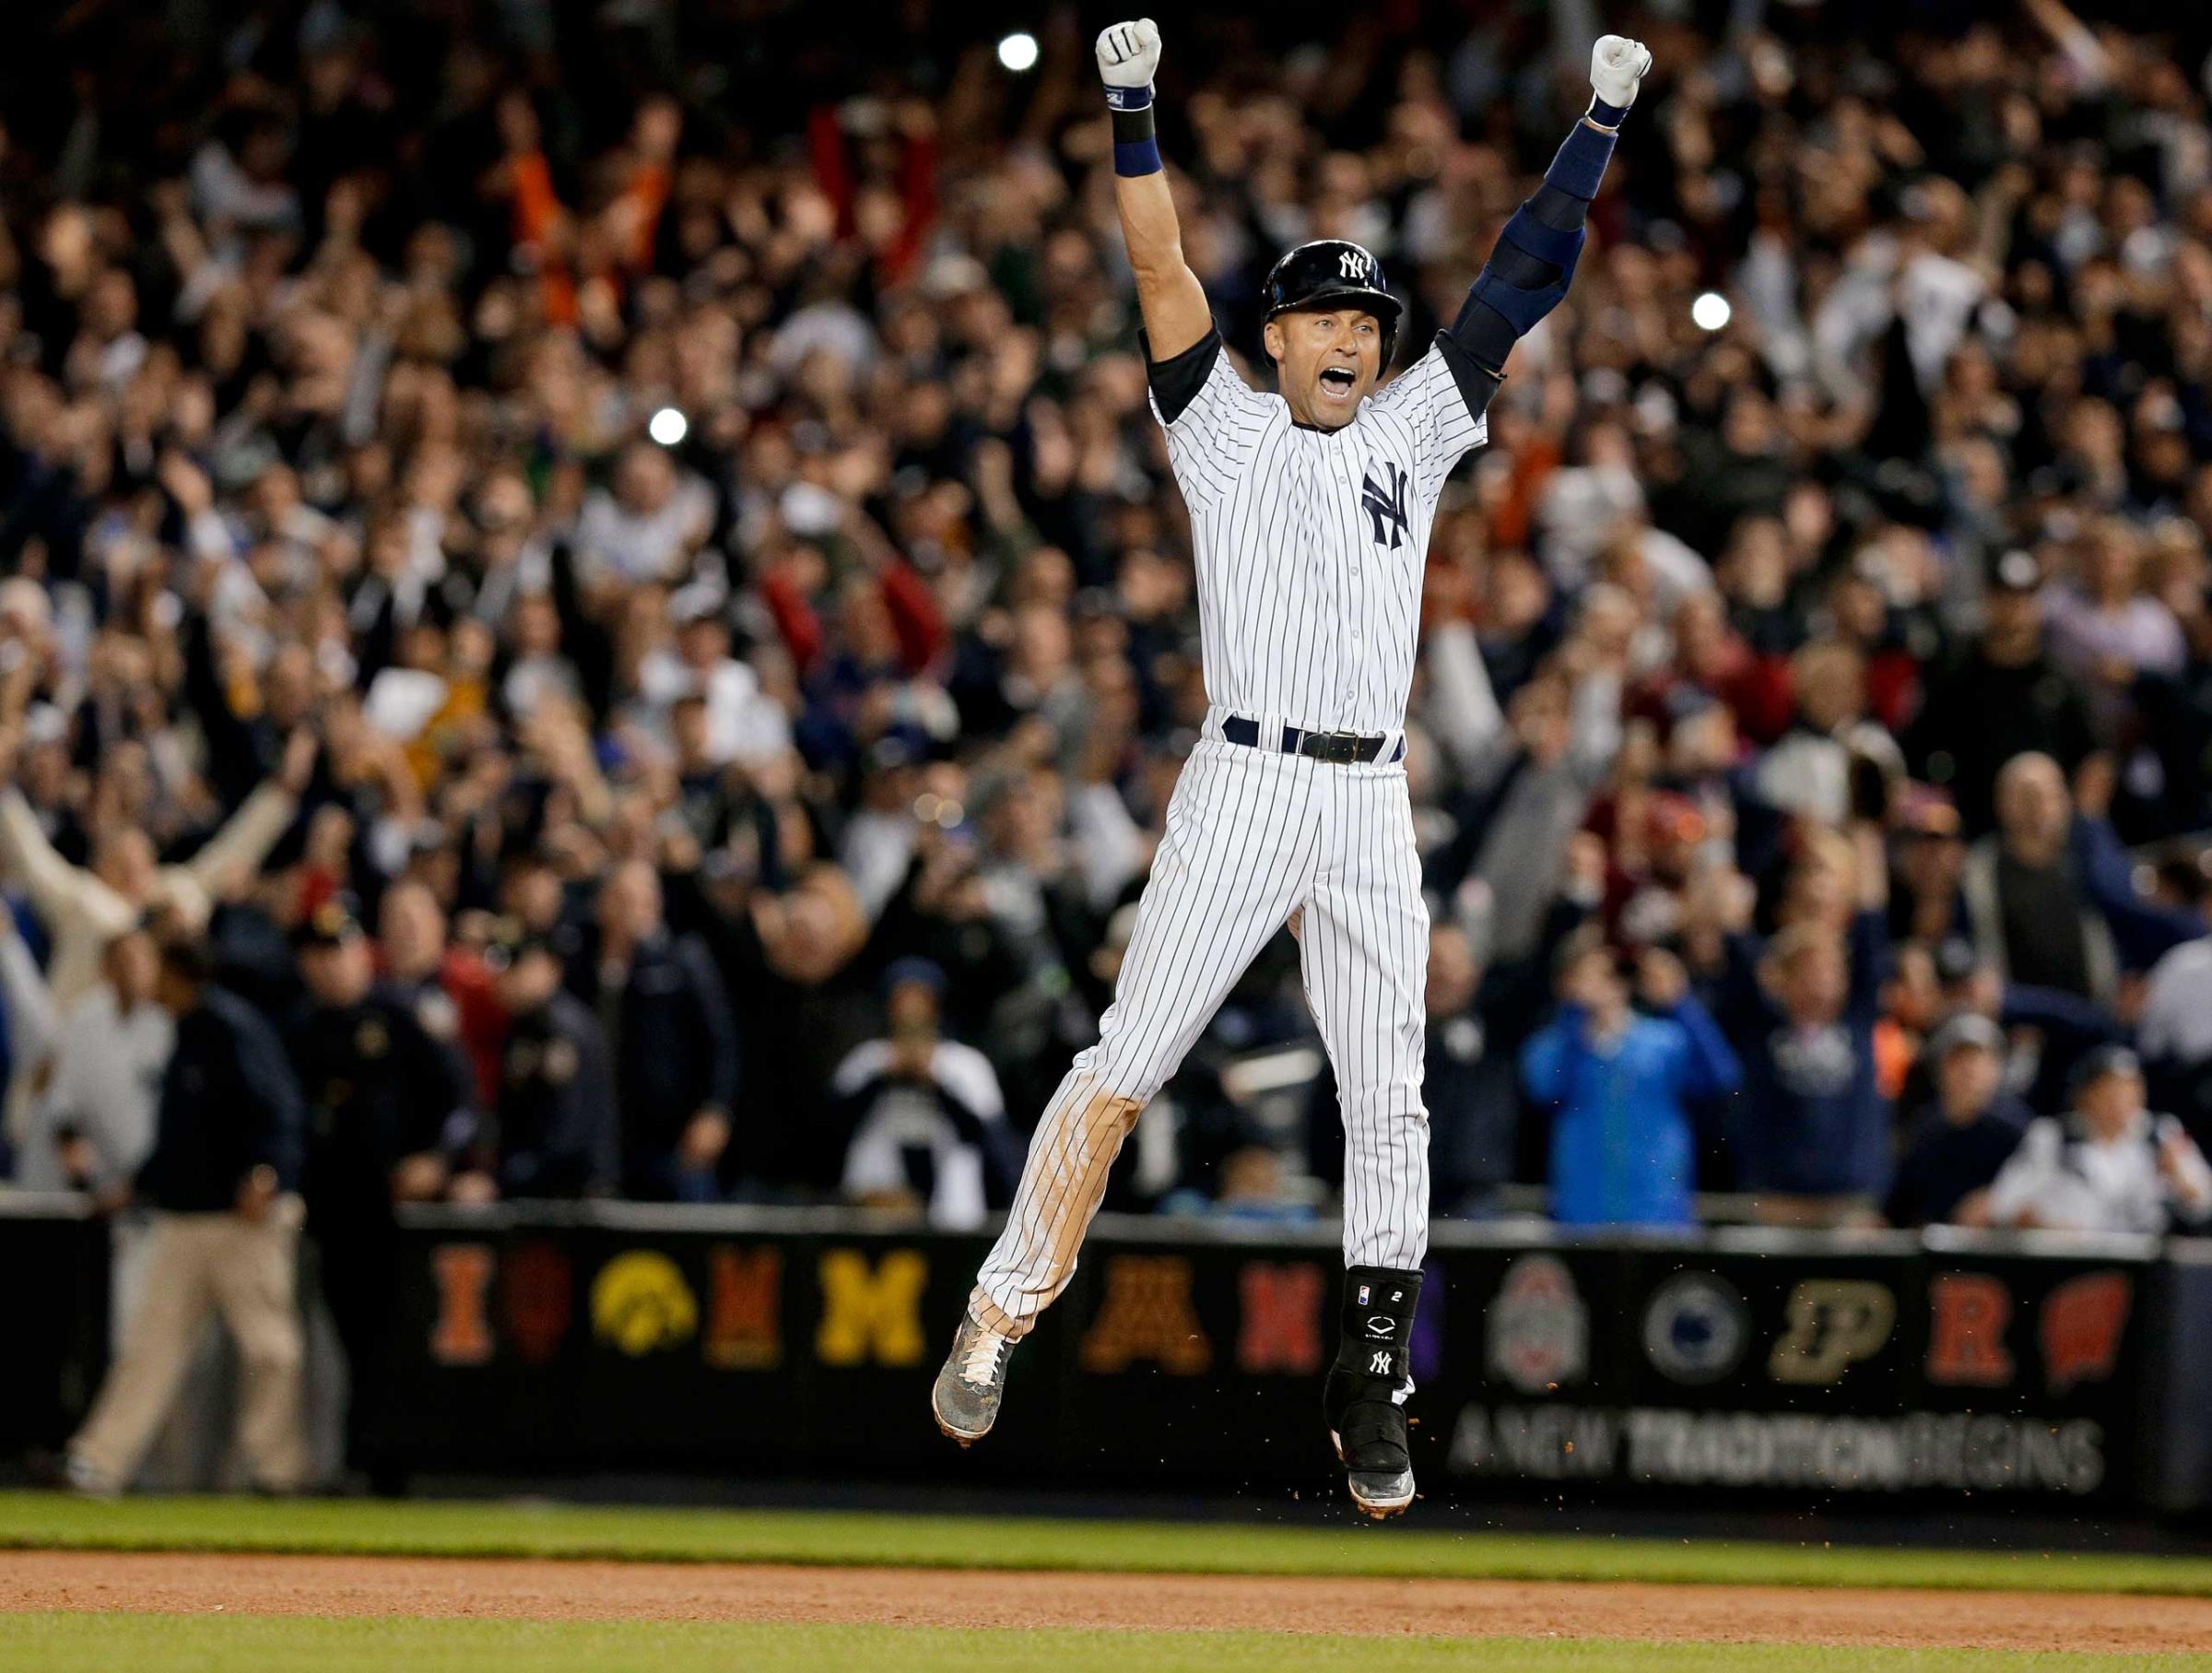 New York Yankees' Derek Jeter jumps after hitting the game-winning single against the Baltimore Orioles in the ninth inning of a baseball game, New York, Sept. 25, 2014.